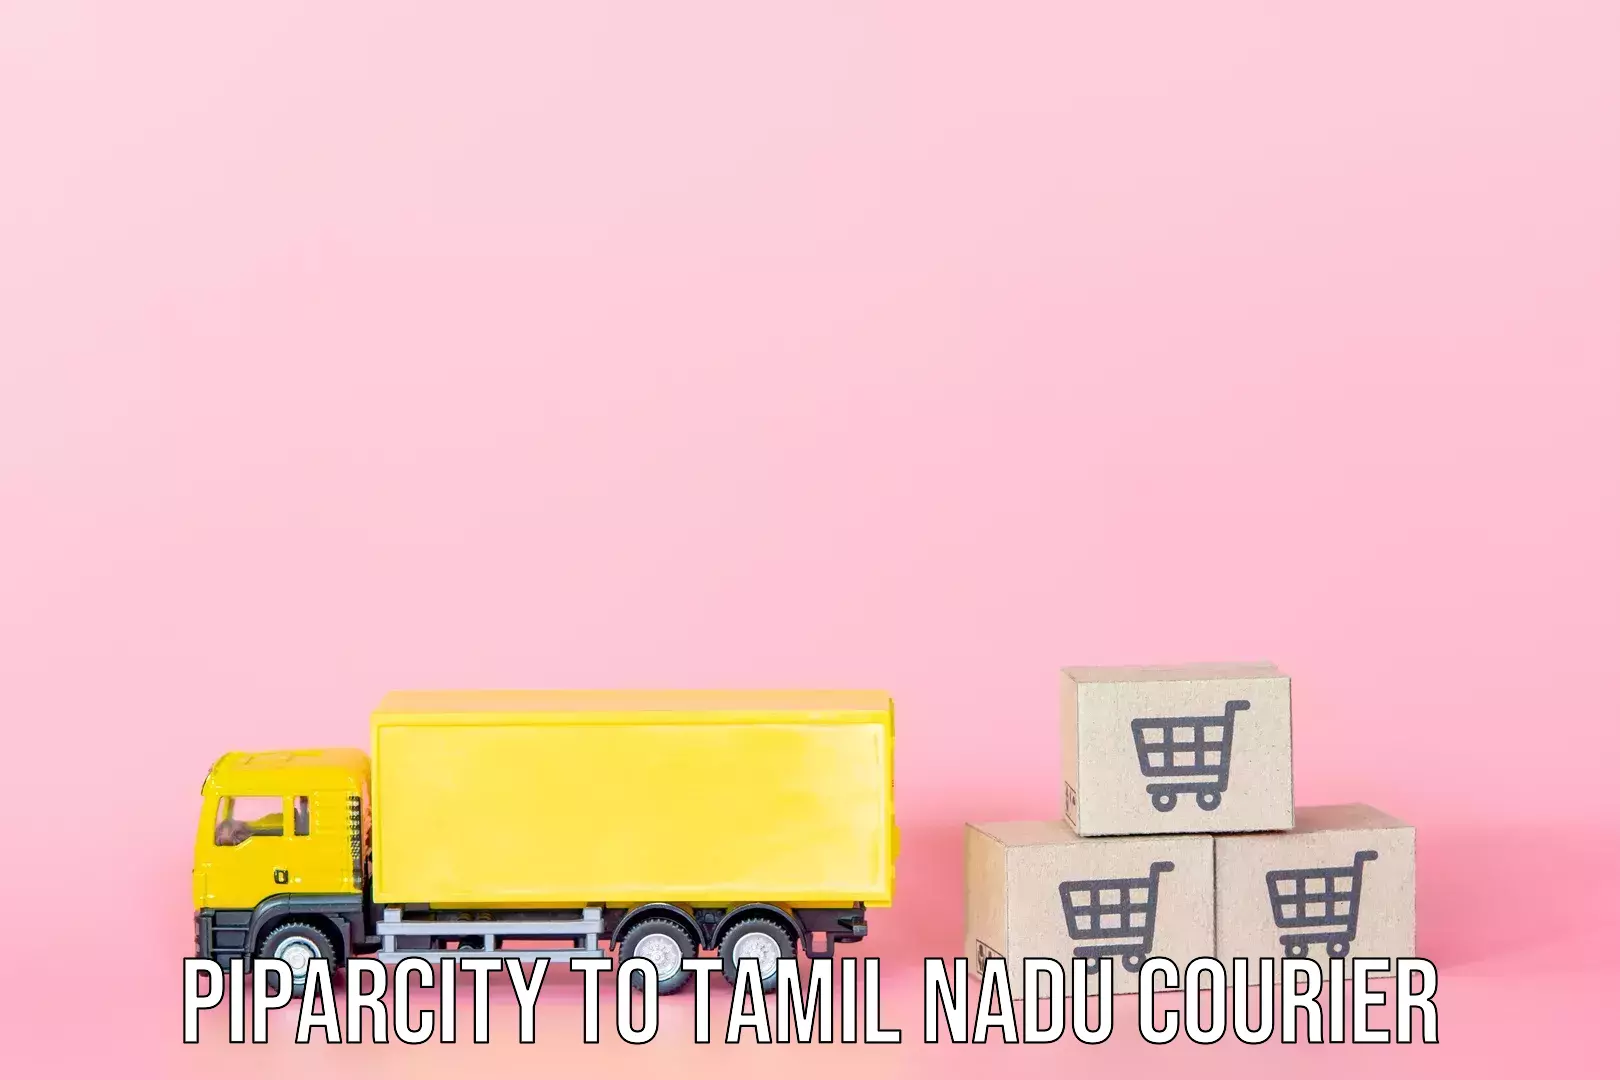 Luggage shipment tracking Piparcity to Tamil Nadu